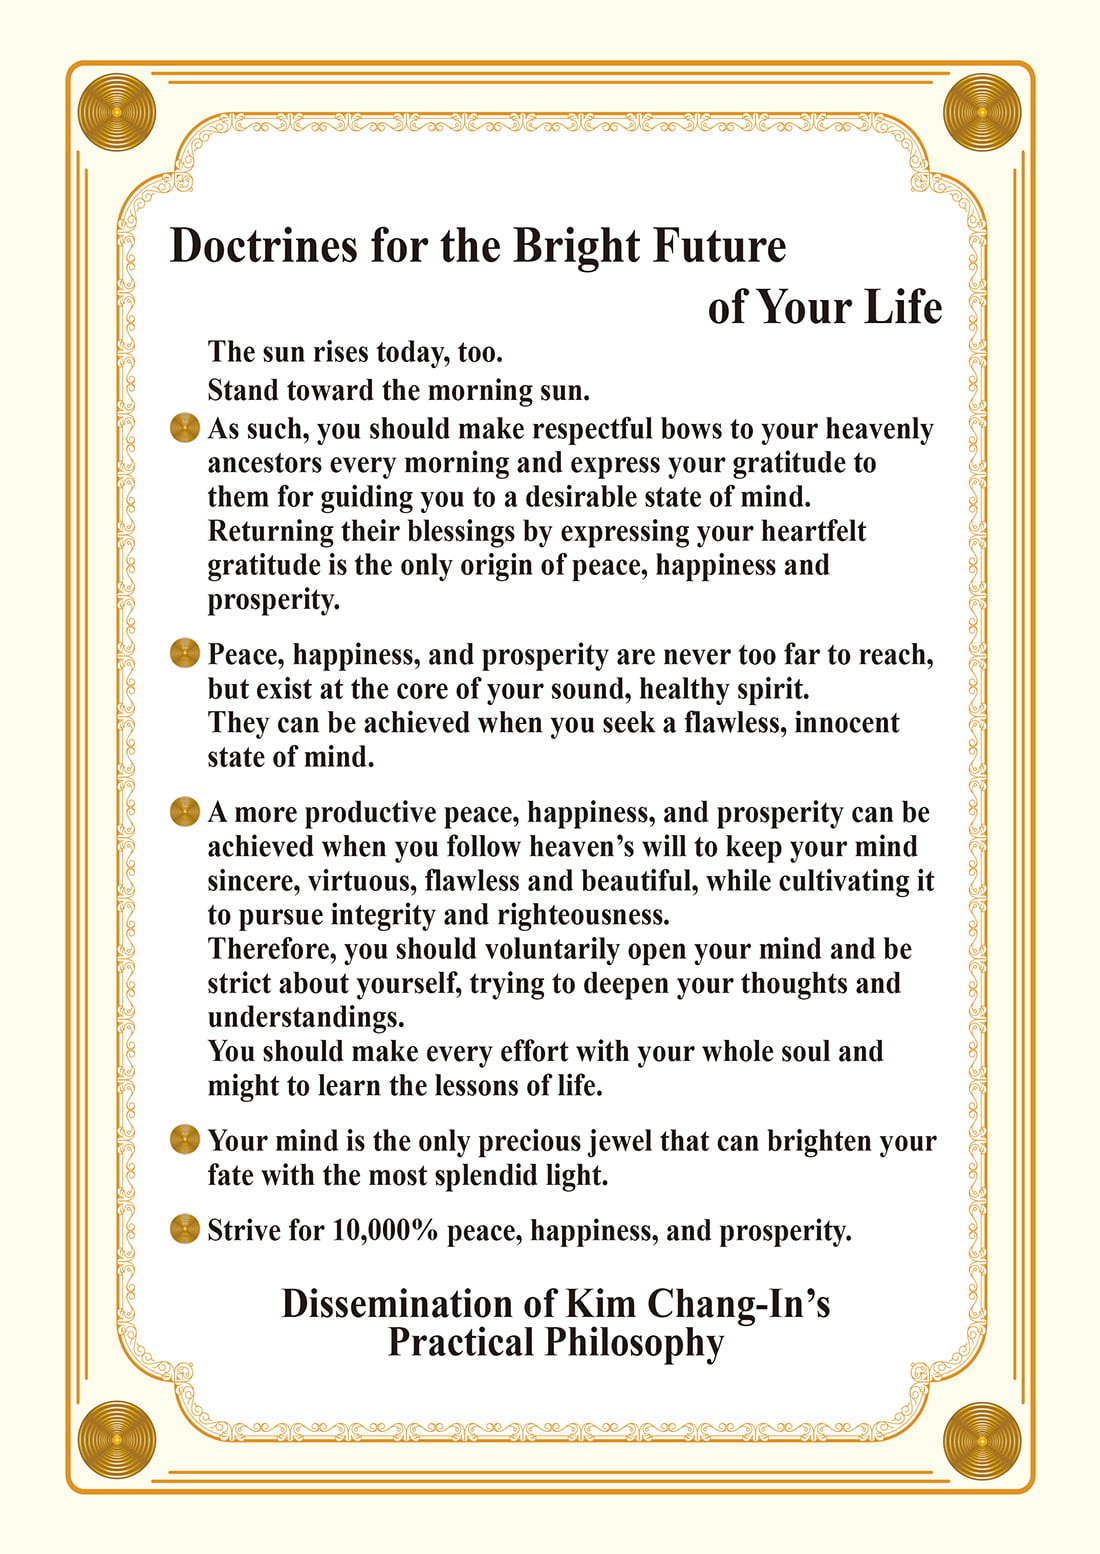 Doctrines for the Bright Future of Your Life